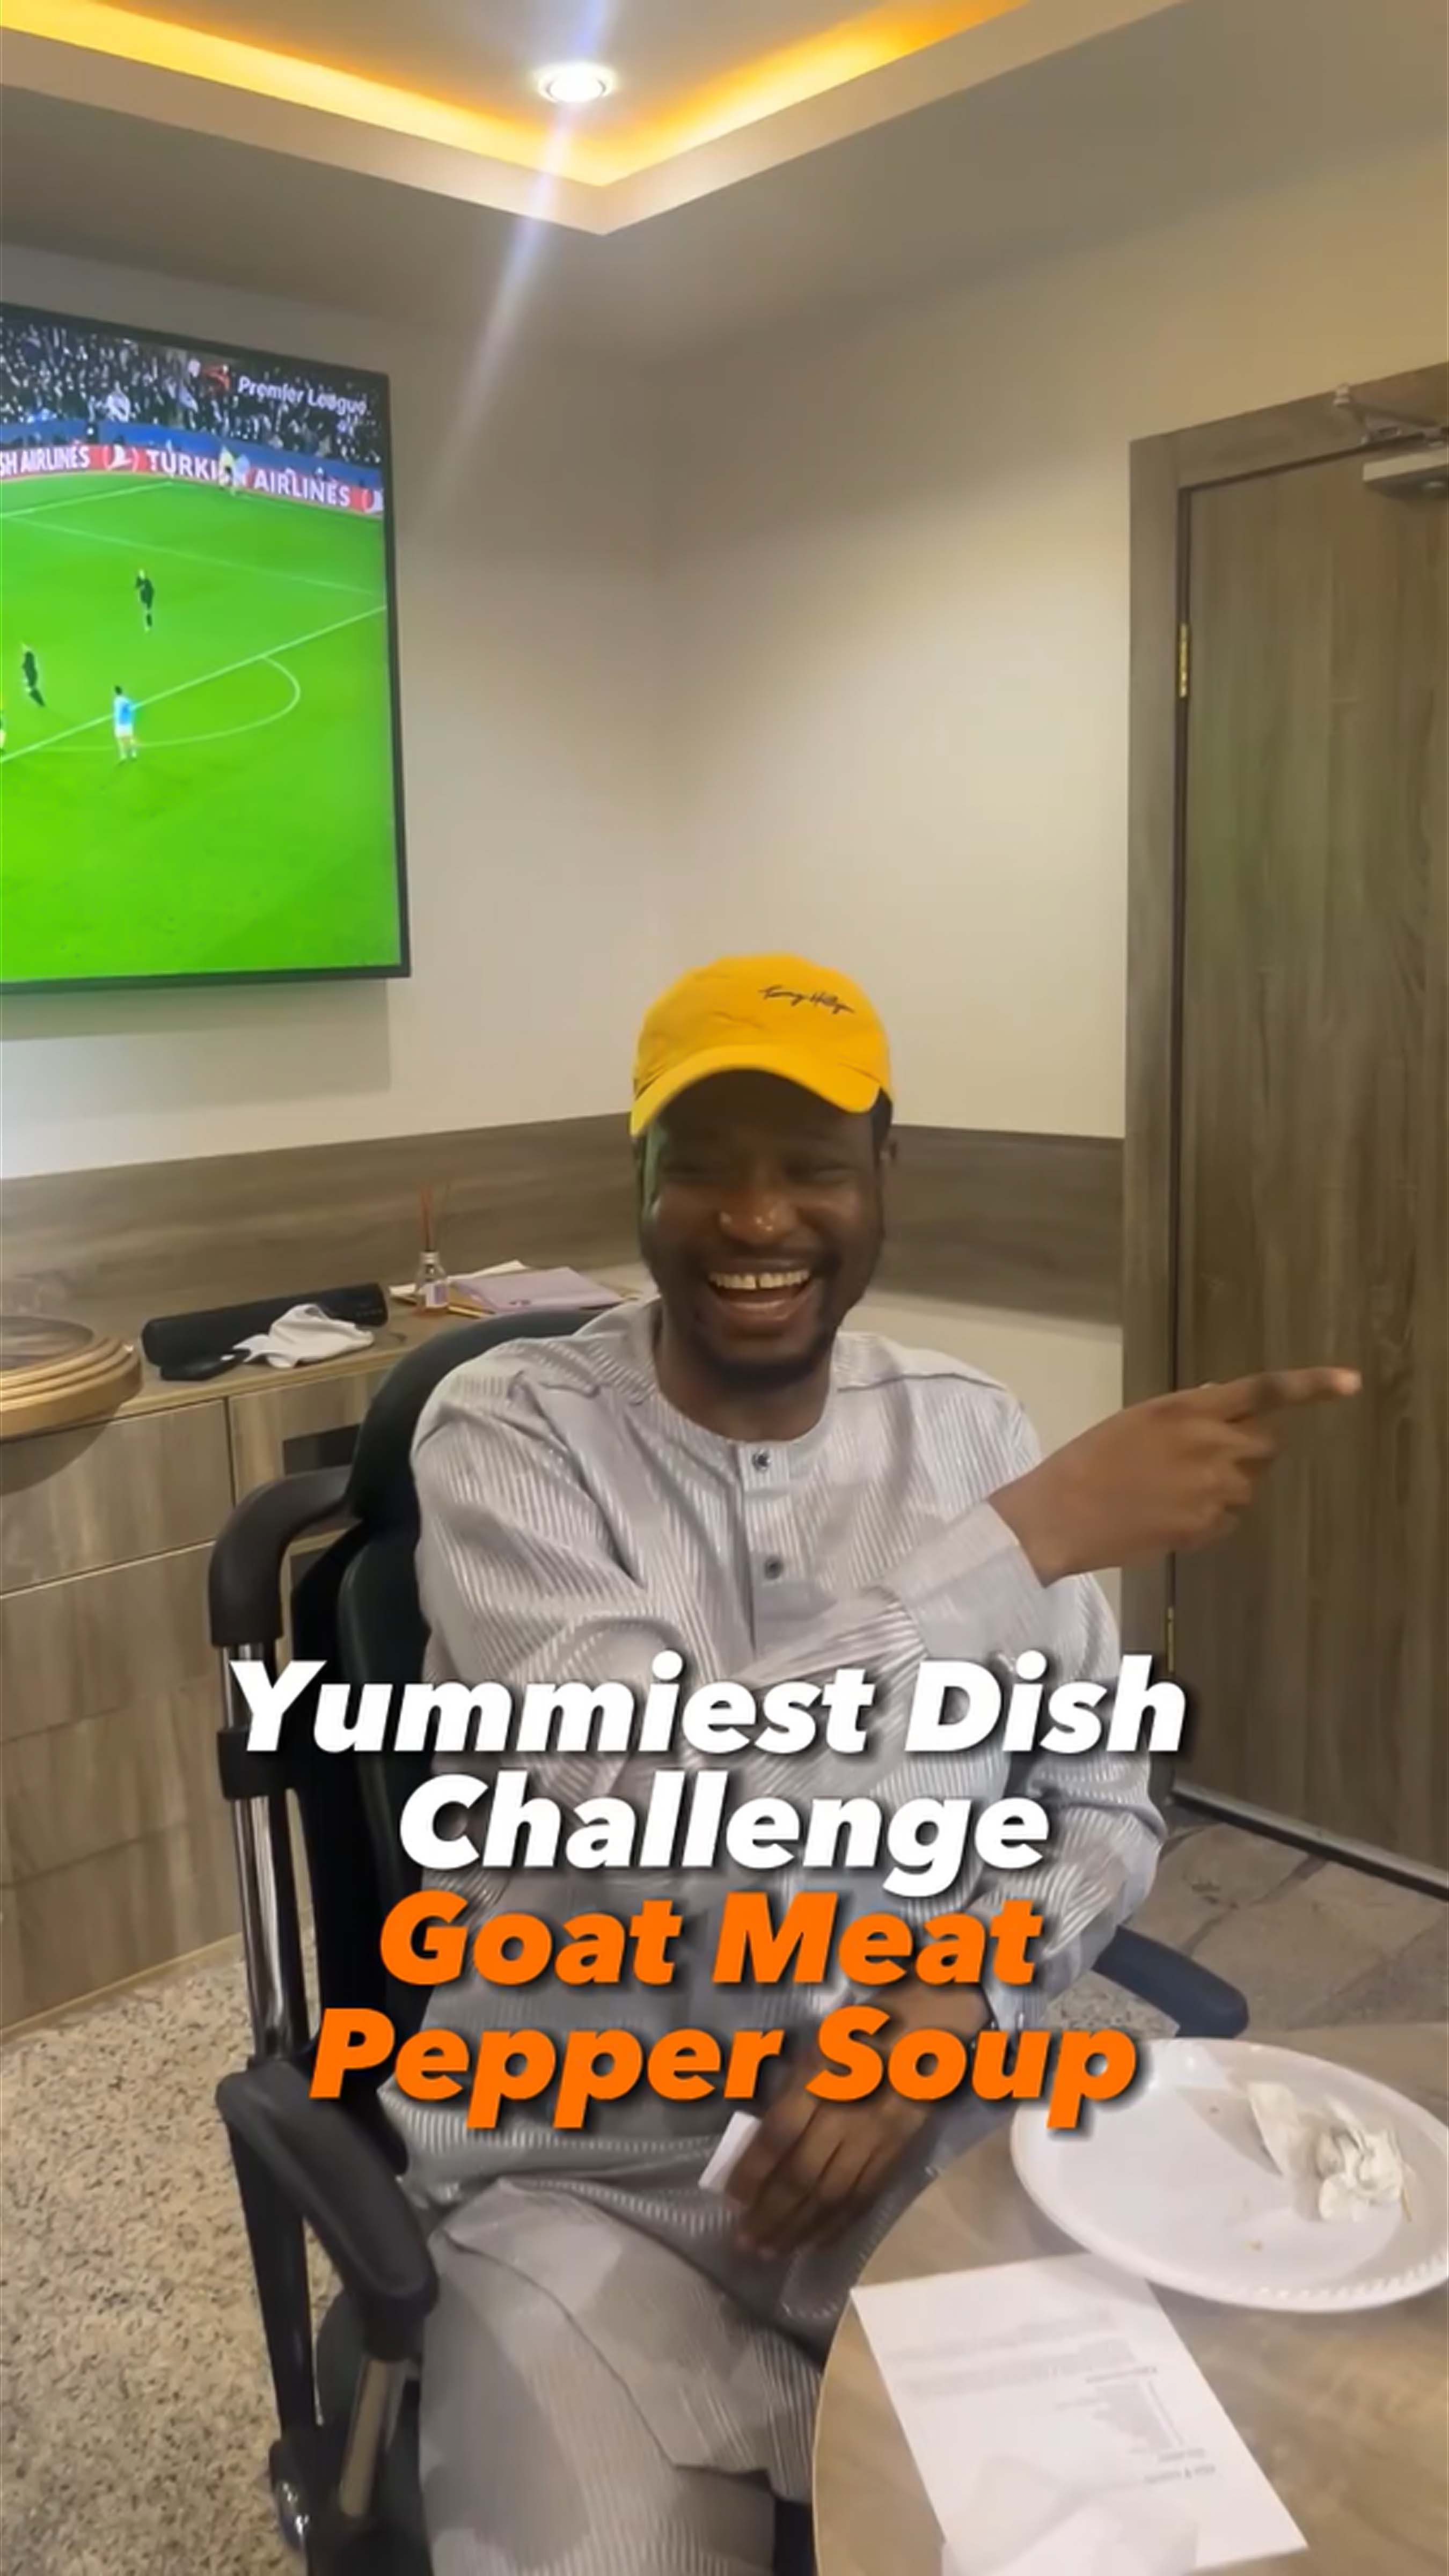 Yummiest Dish Challenge episode #6 Goat meat pepper soup